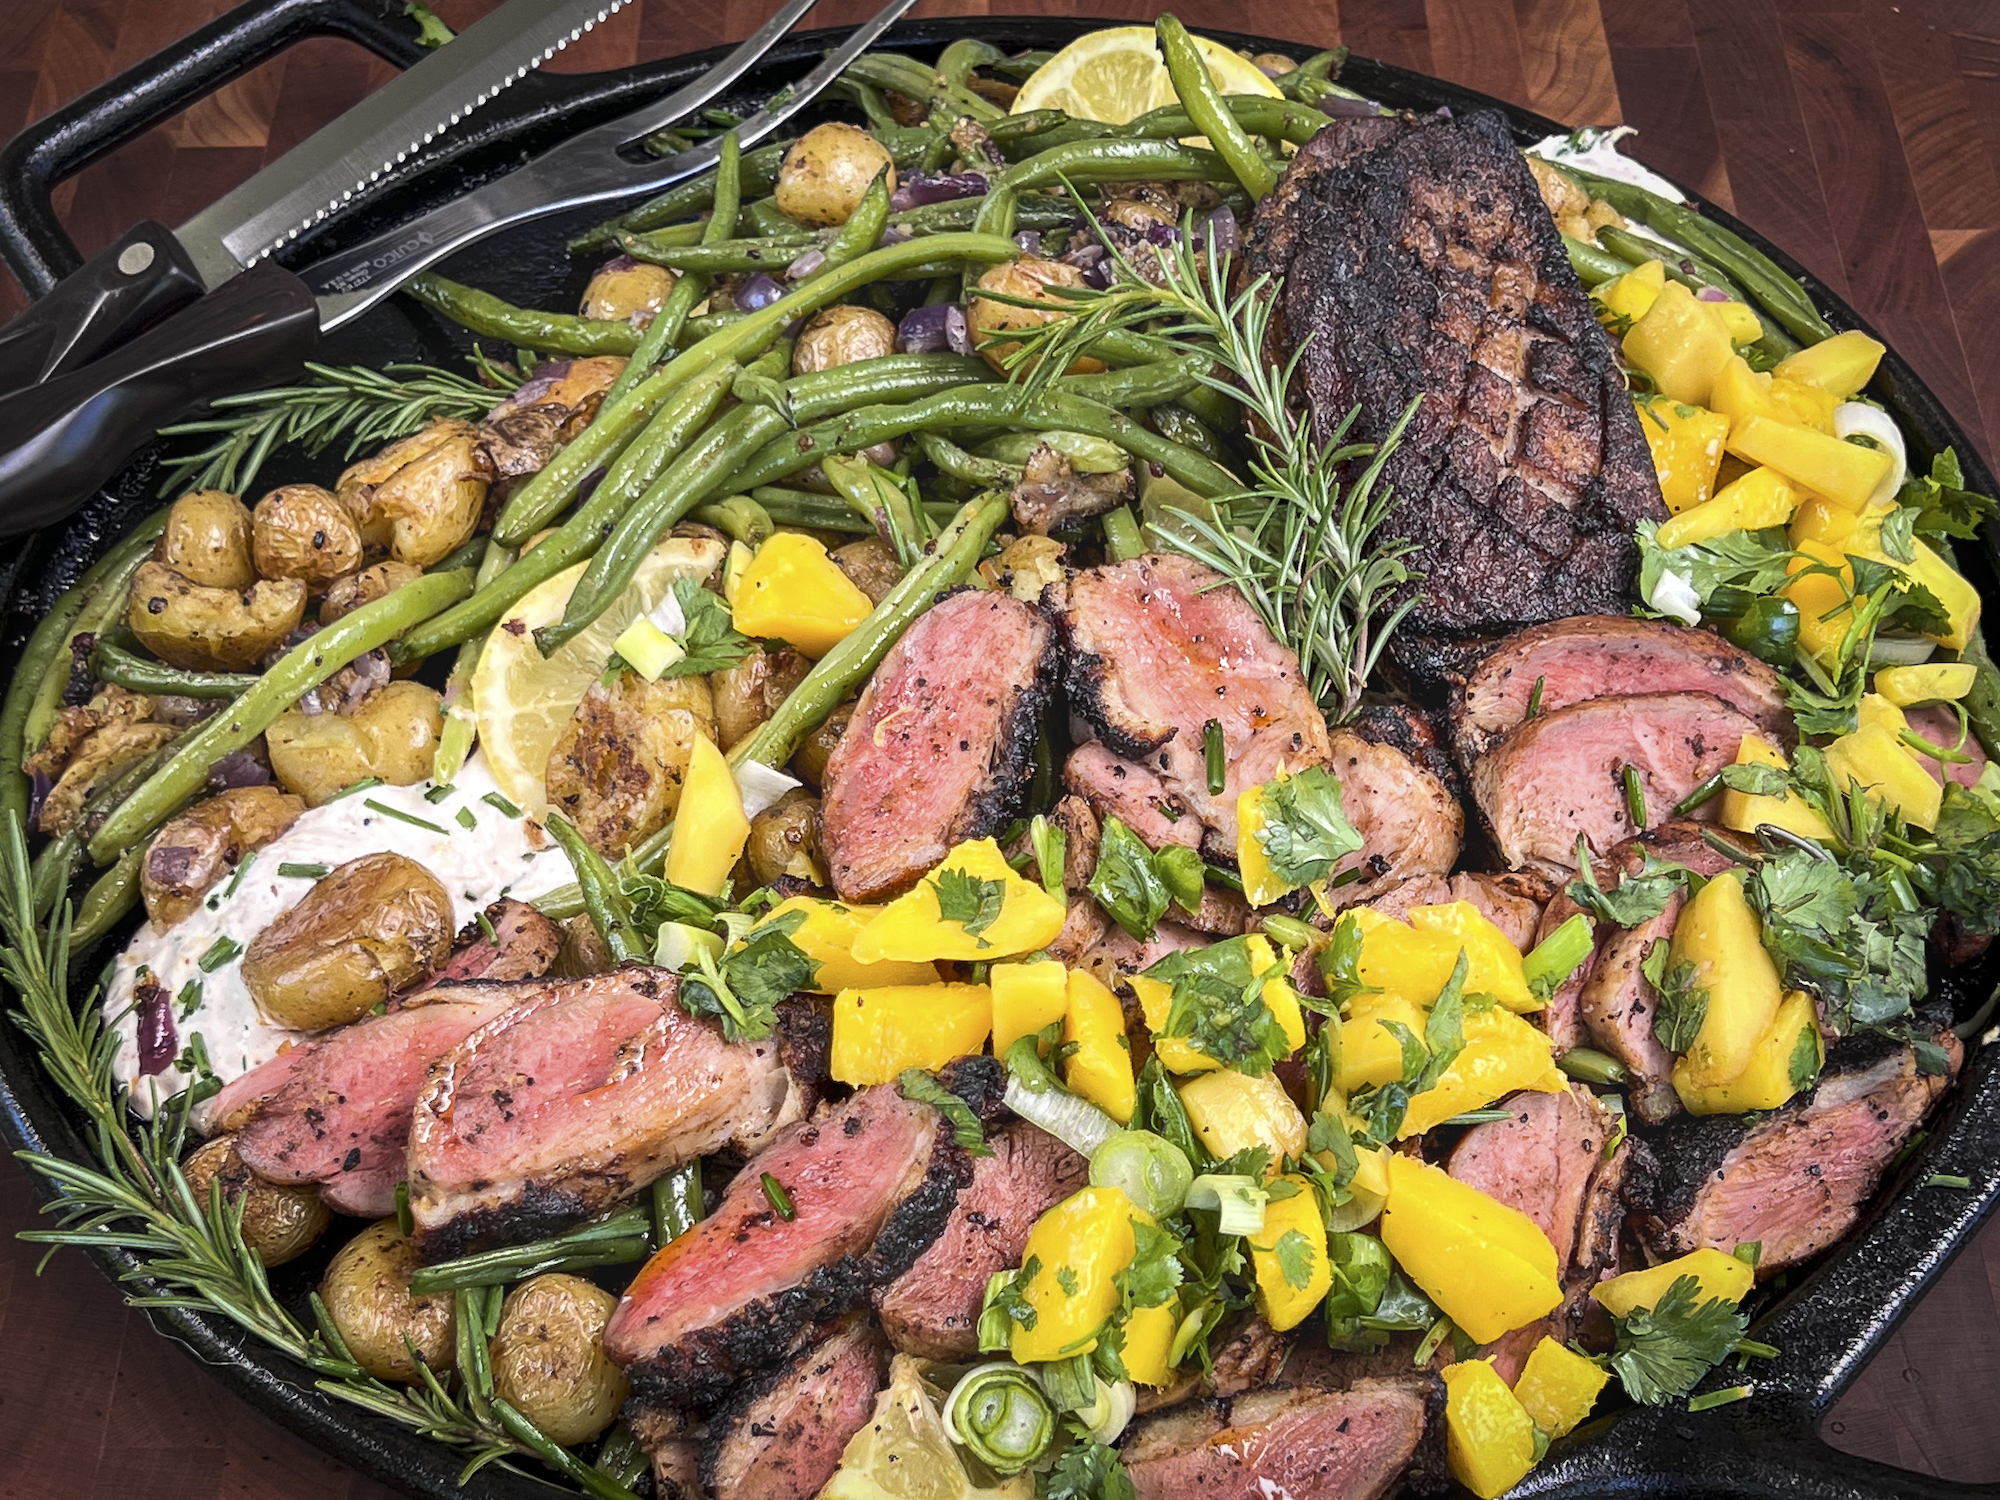 A platter of sliced smoked duck with mango, green beans, and golden potatoes.